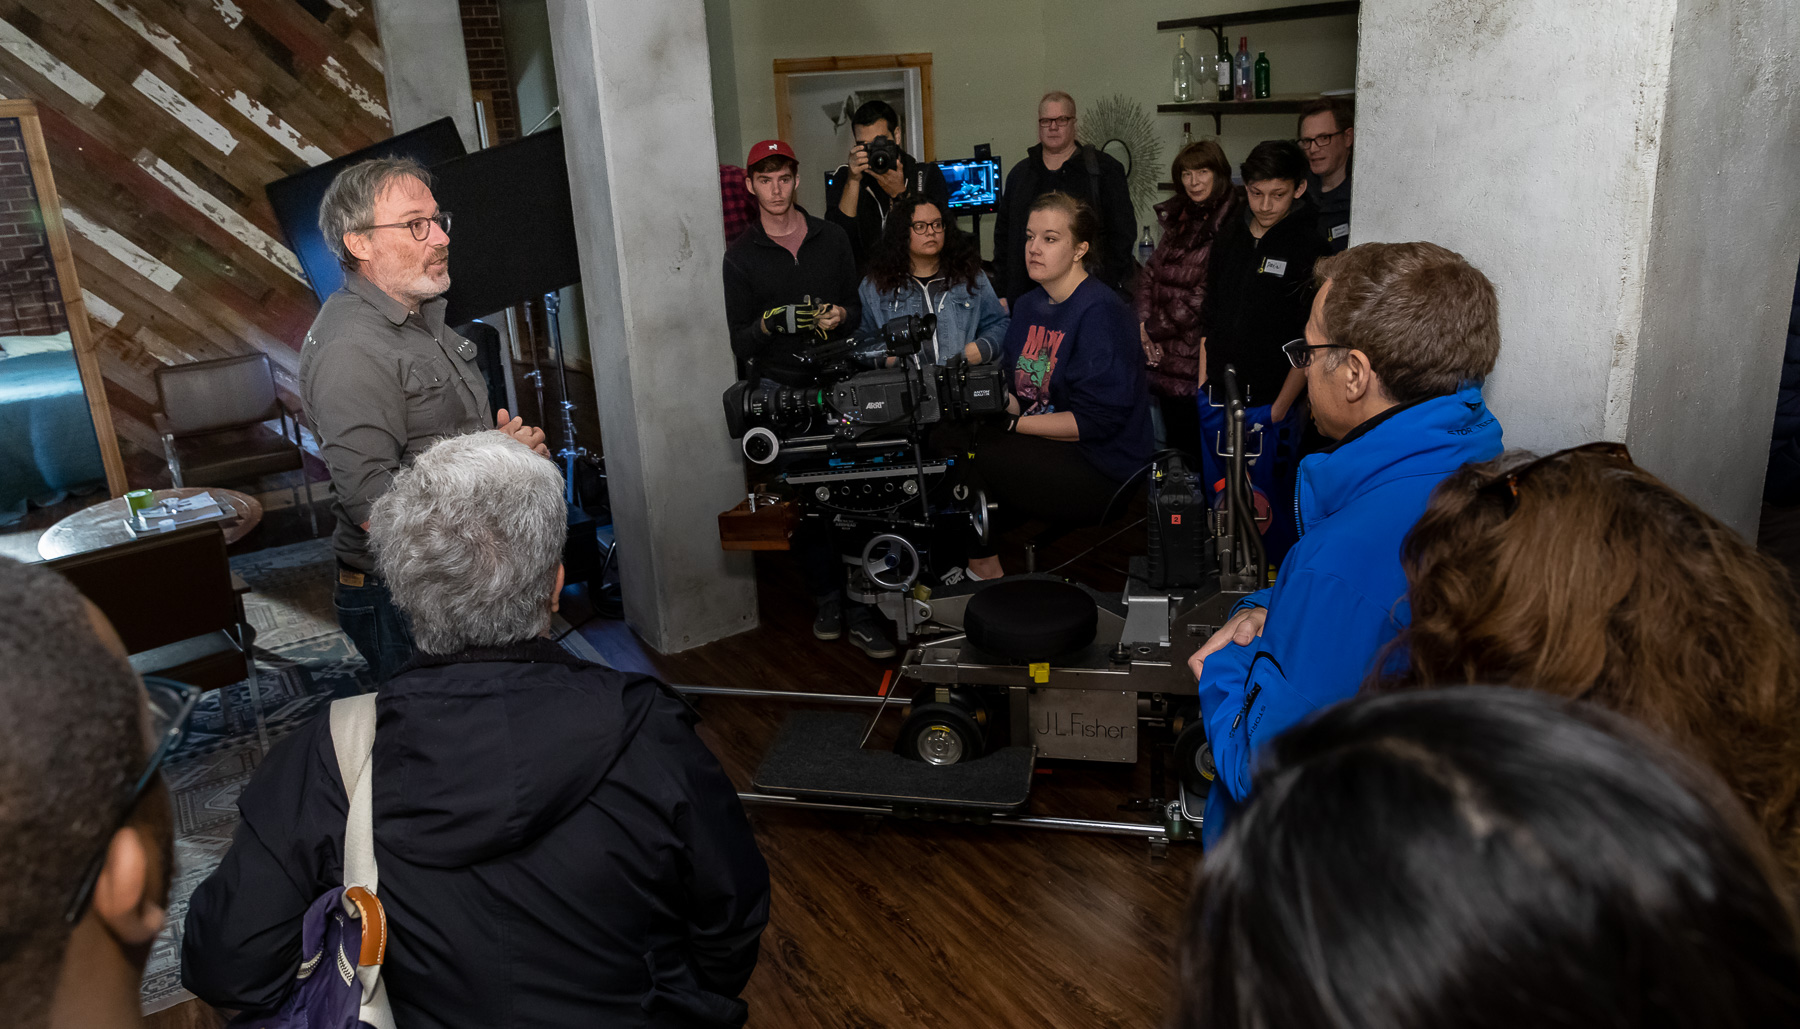 Pete Biagi, cinematographer in residence in the College of Computing and Digital Media, leads a demonstration of filming techniques during the Chicago Ideas Week Lab: Behind the Scenes at Cinespace with DePaul University, Monday, Oct. 14, 2019, at Cinespace Chicago Film Studios on Chicago’s West Side. (DePaul University/Jeff Carrion)